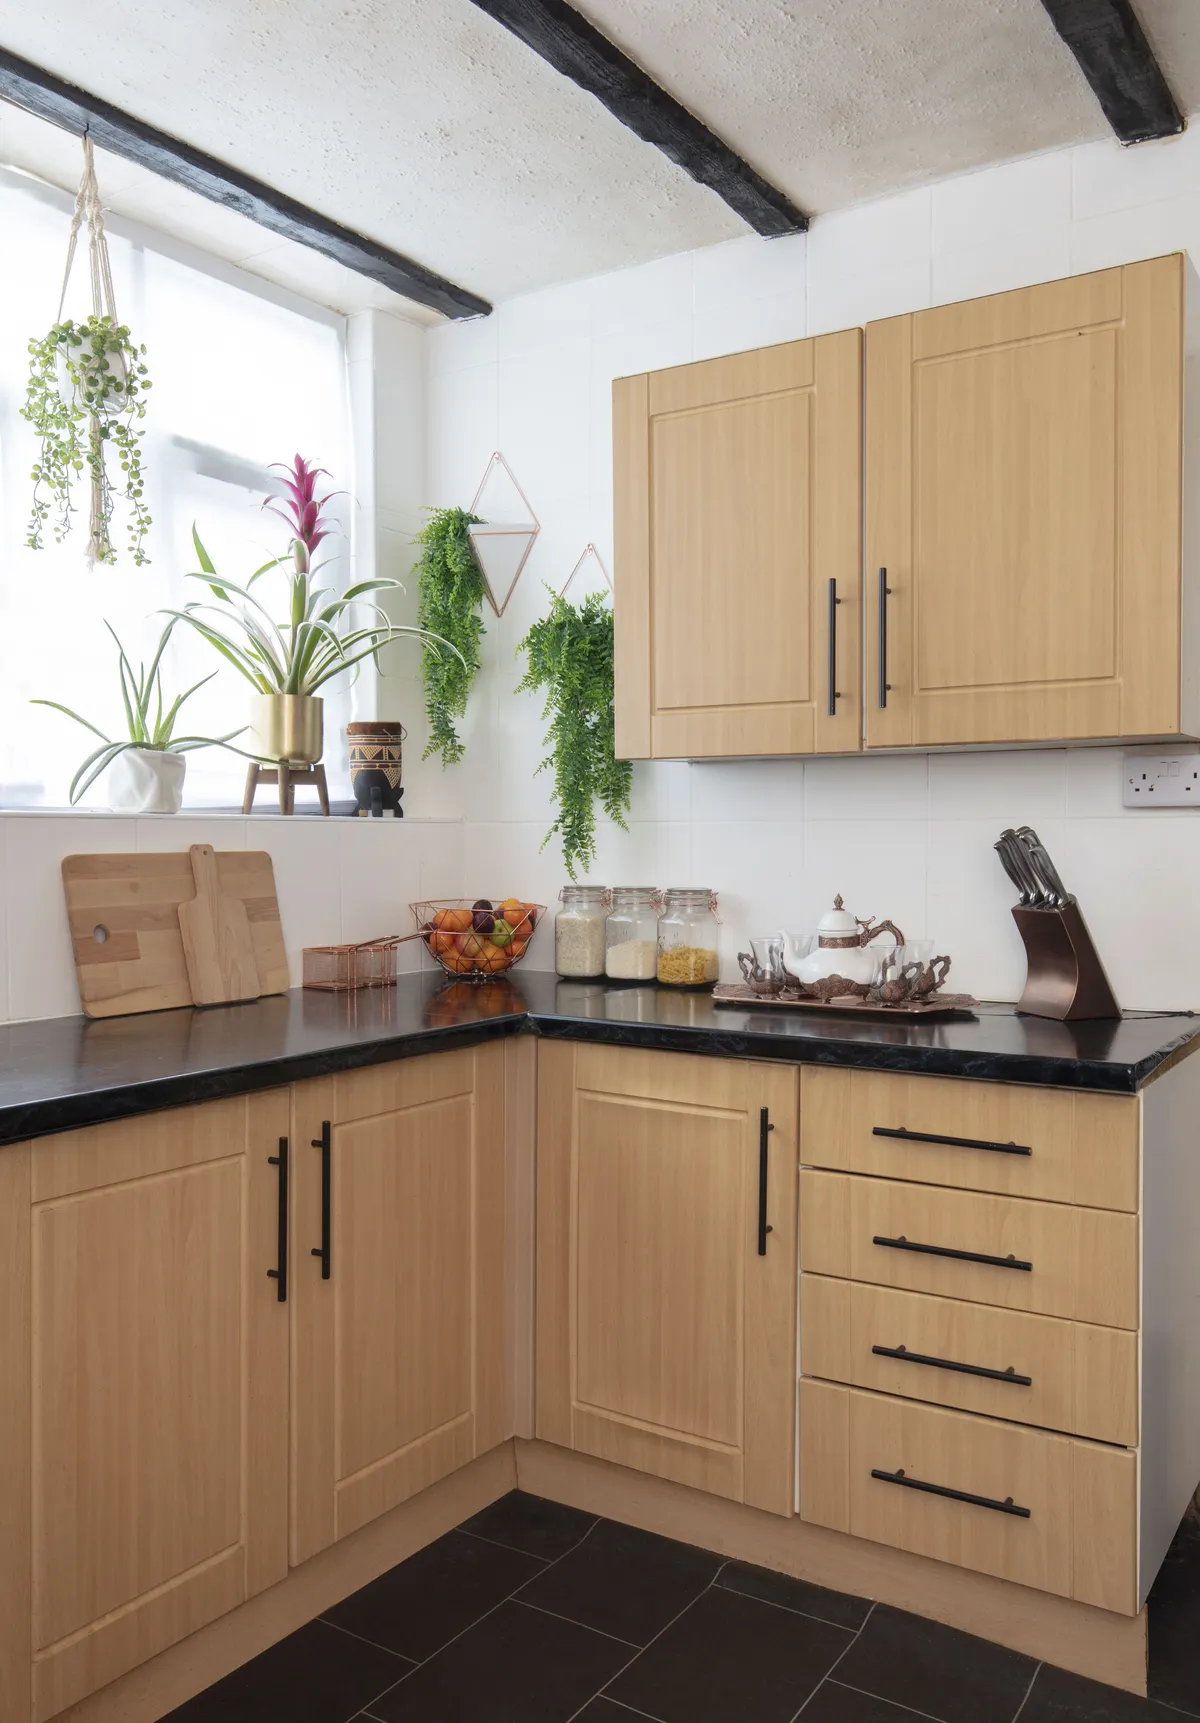 The kitchen is on their renovation to-do list. ‘I’m going to play with the layout and swap some wall cabinets for open shelving. I spend a lot of time in the kitchen, so I want a breakfast bar,’ says Alimah. ‘I’ll keep the beams but paint them’